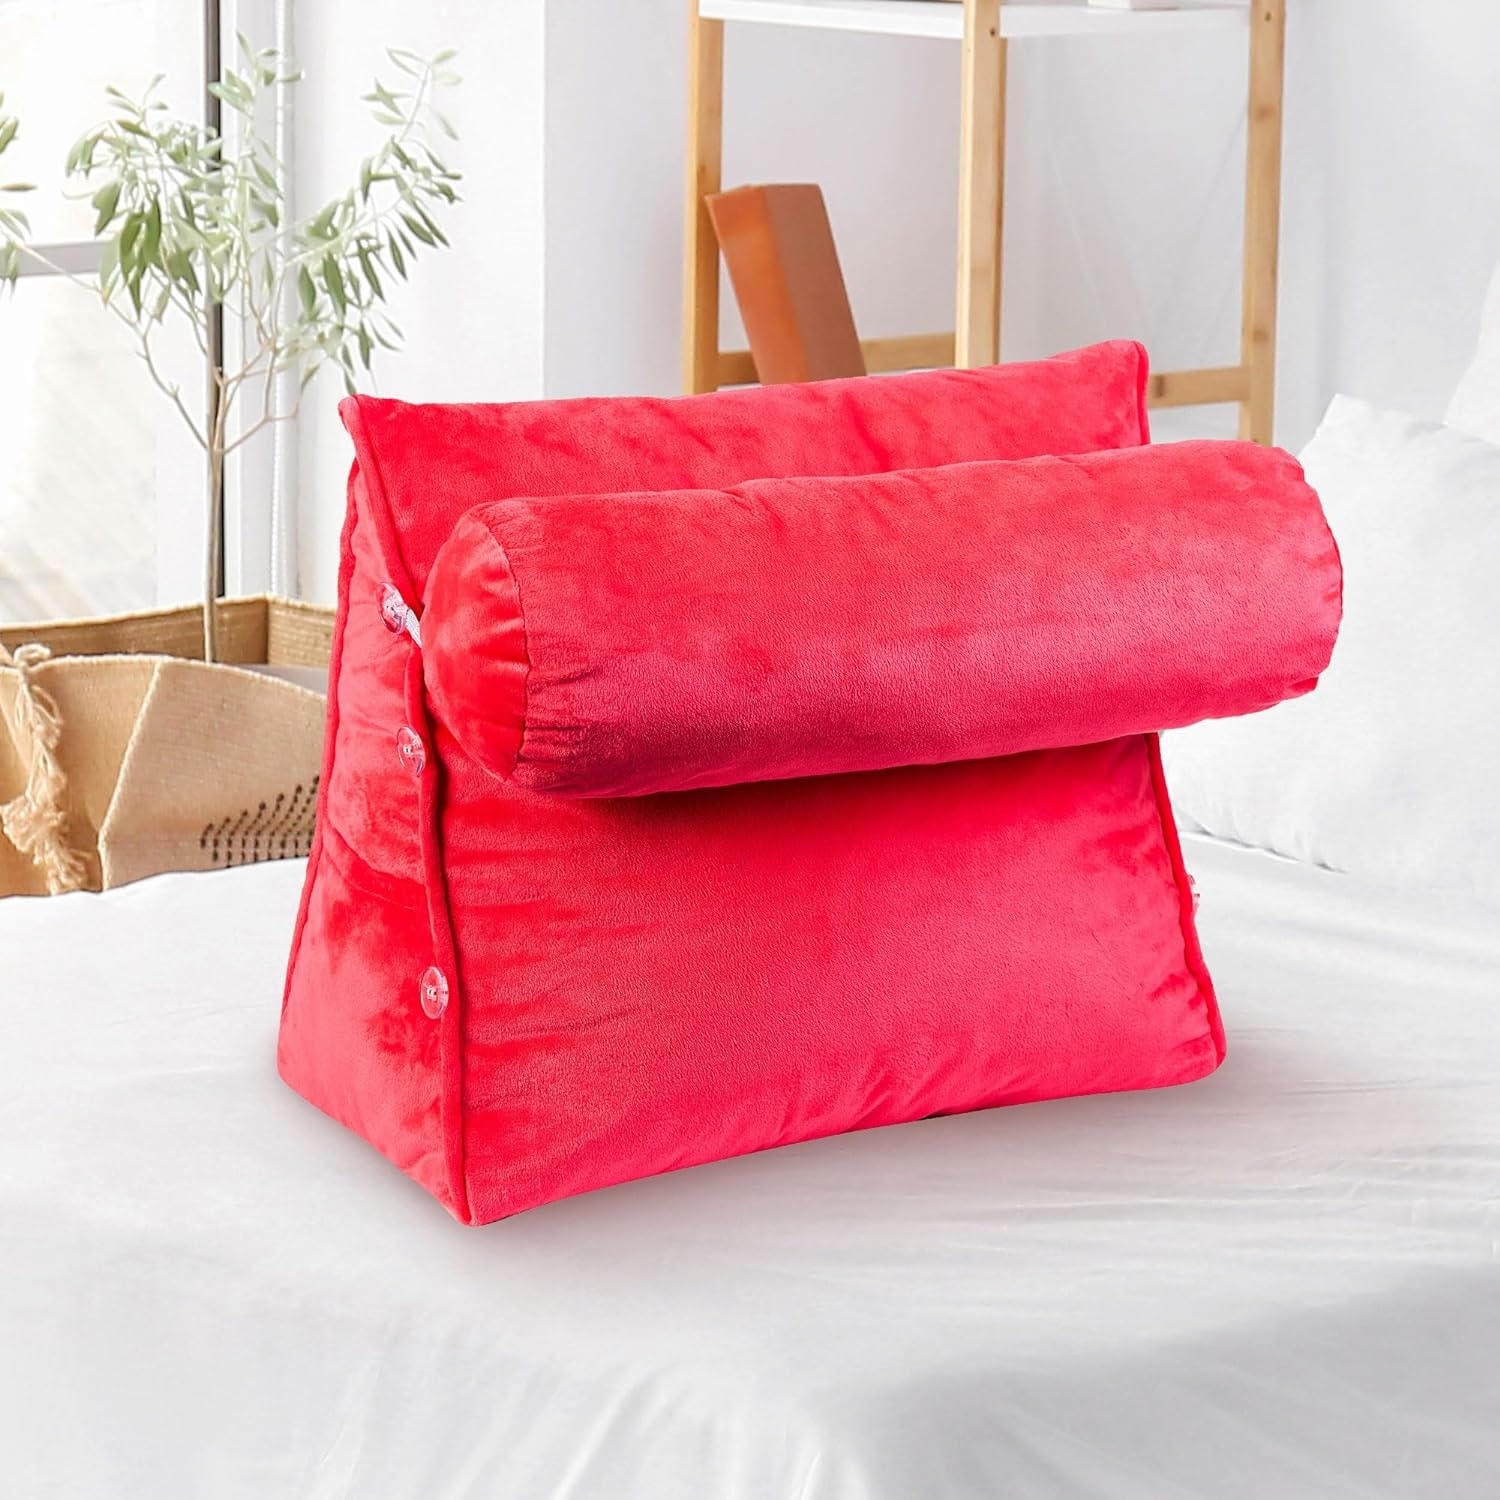 https://ak1.ostkcdn.com/images/products/is/images/direct/a6258310ed644f9f56d32f4a9b95e049a86f25e8/Cheer-Collection-TV-Reading-and-Wedge-Pillow-with-Detachable-Bolster.jpg